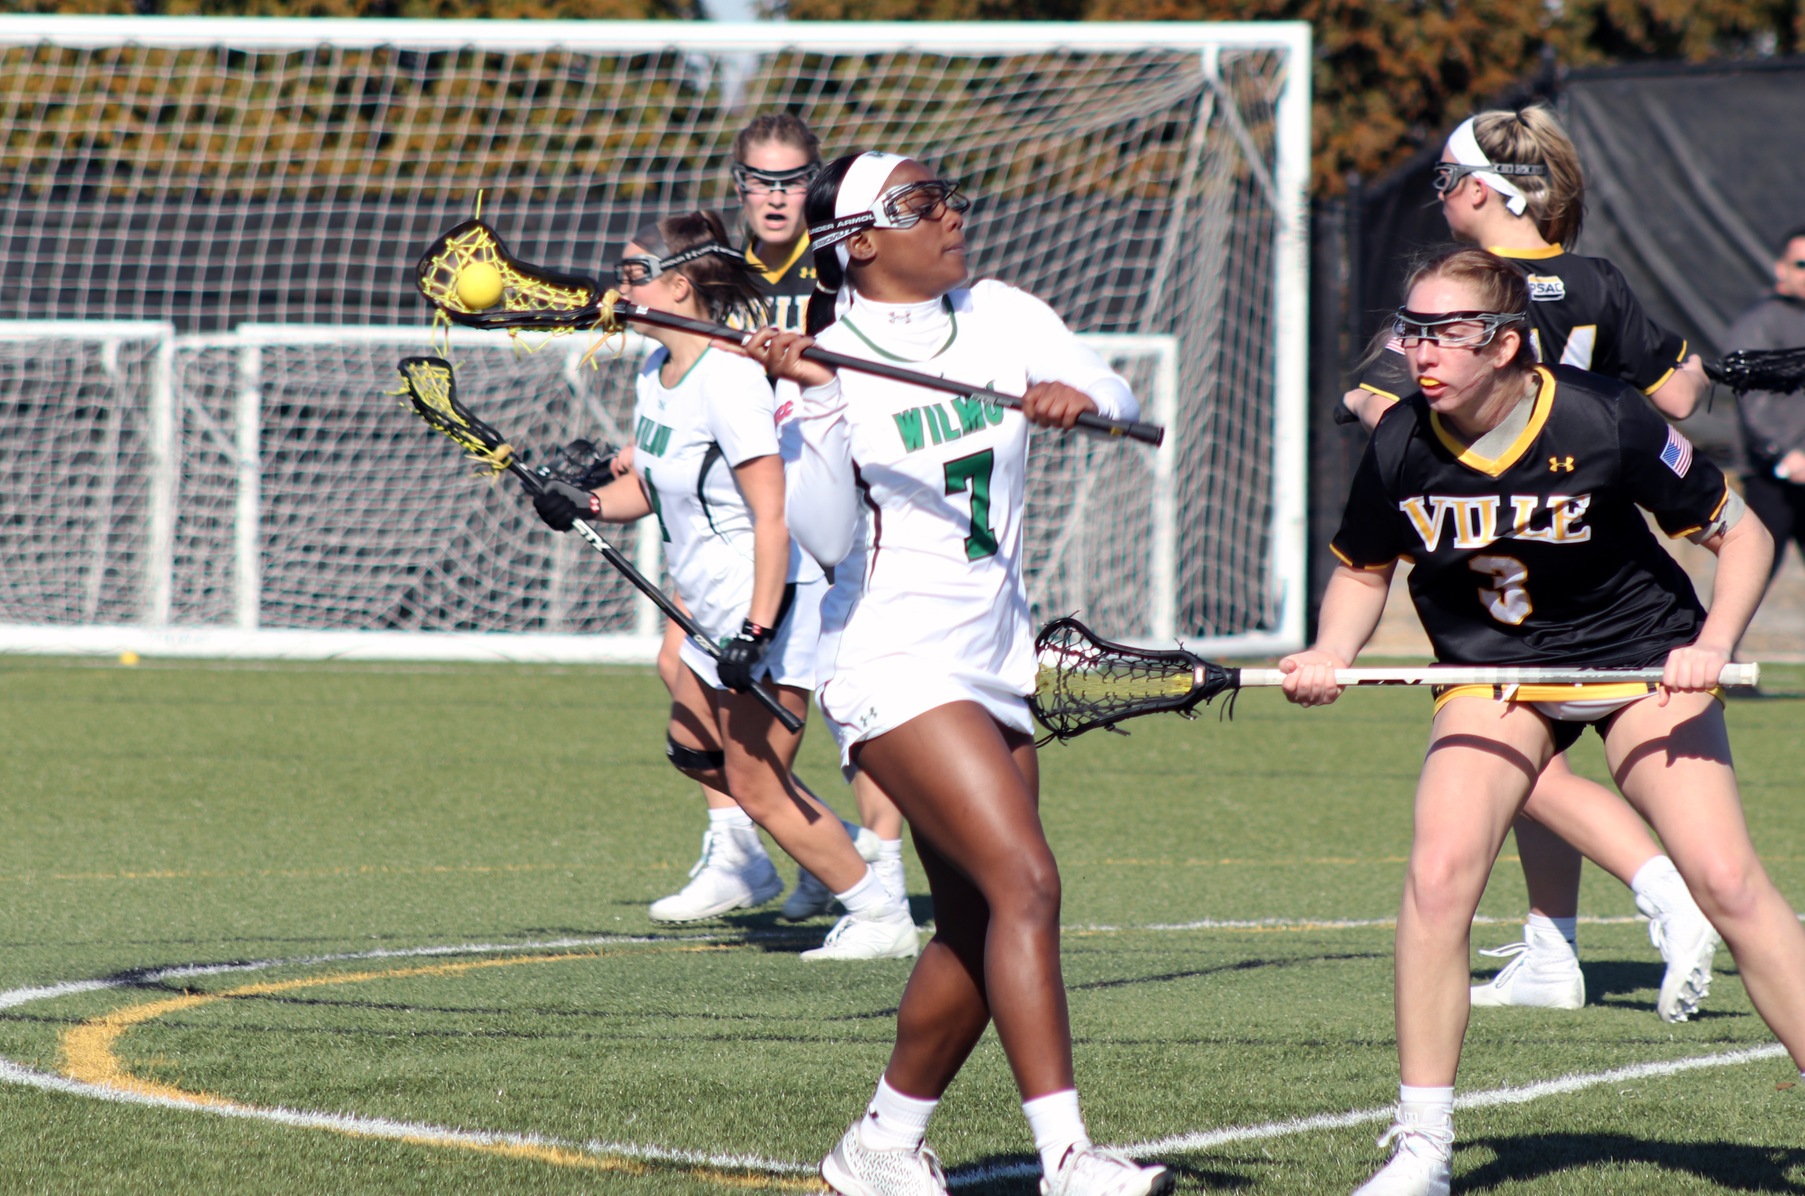 File photo of Lashay Ross who scored four goals and had two assists against Bloomsburg. Copyright 2020. Wilmington University. All rights reserved. Photo by Laura Gil. February 22, 2020 vs. Millersville.